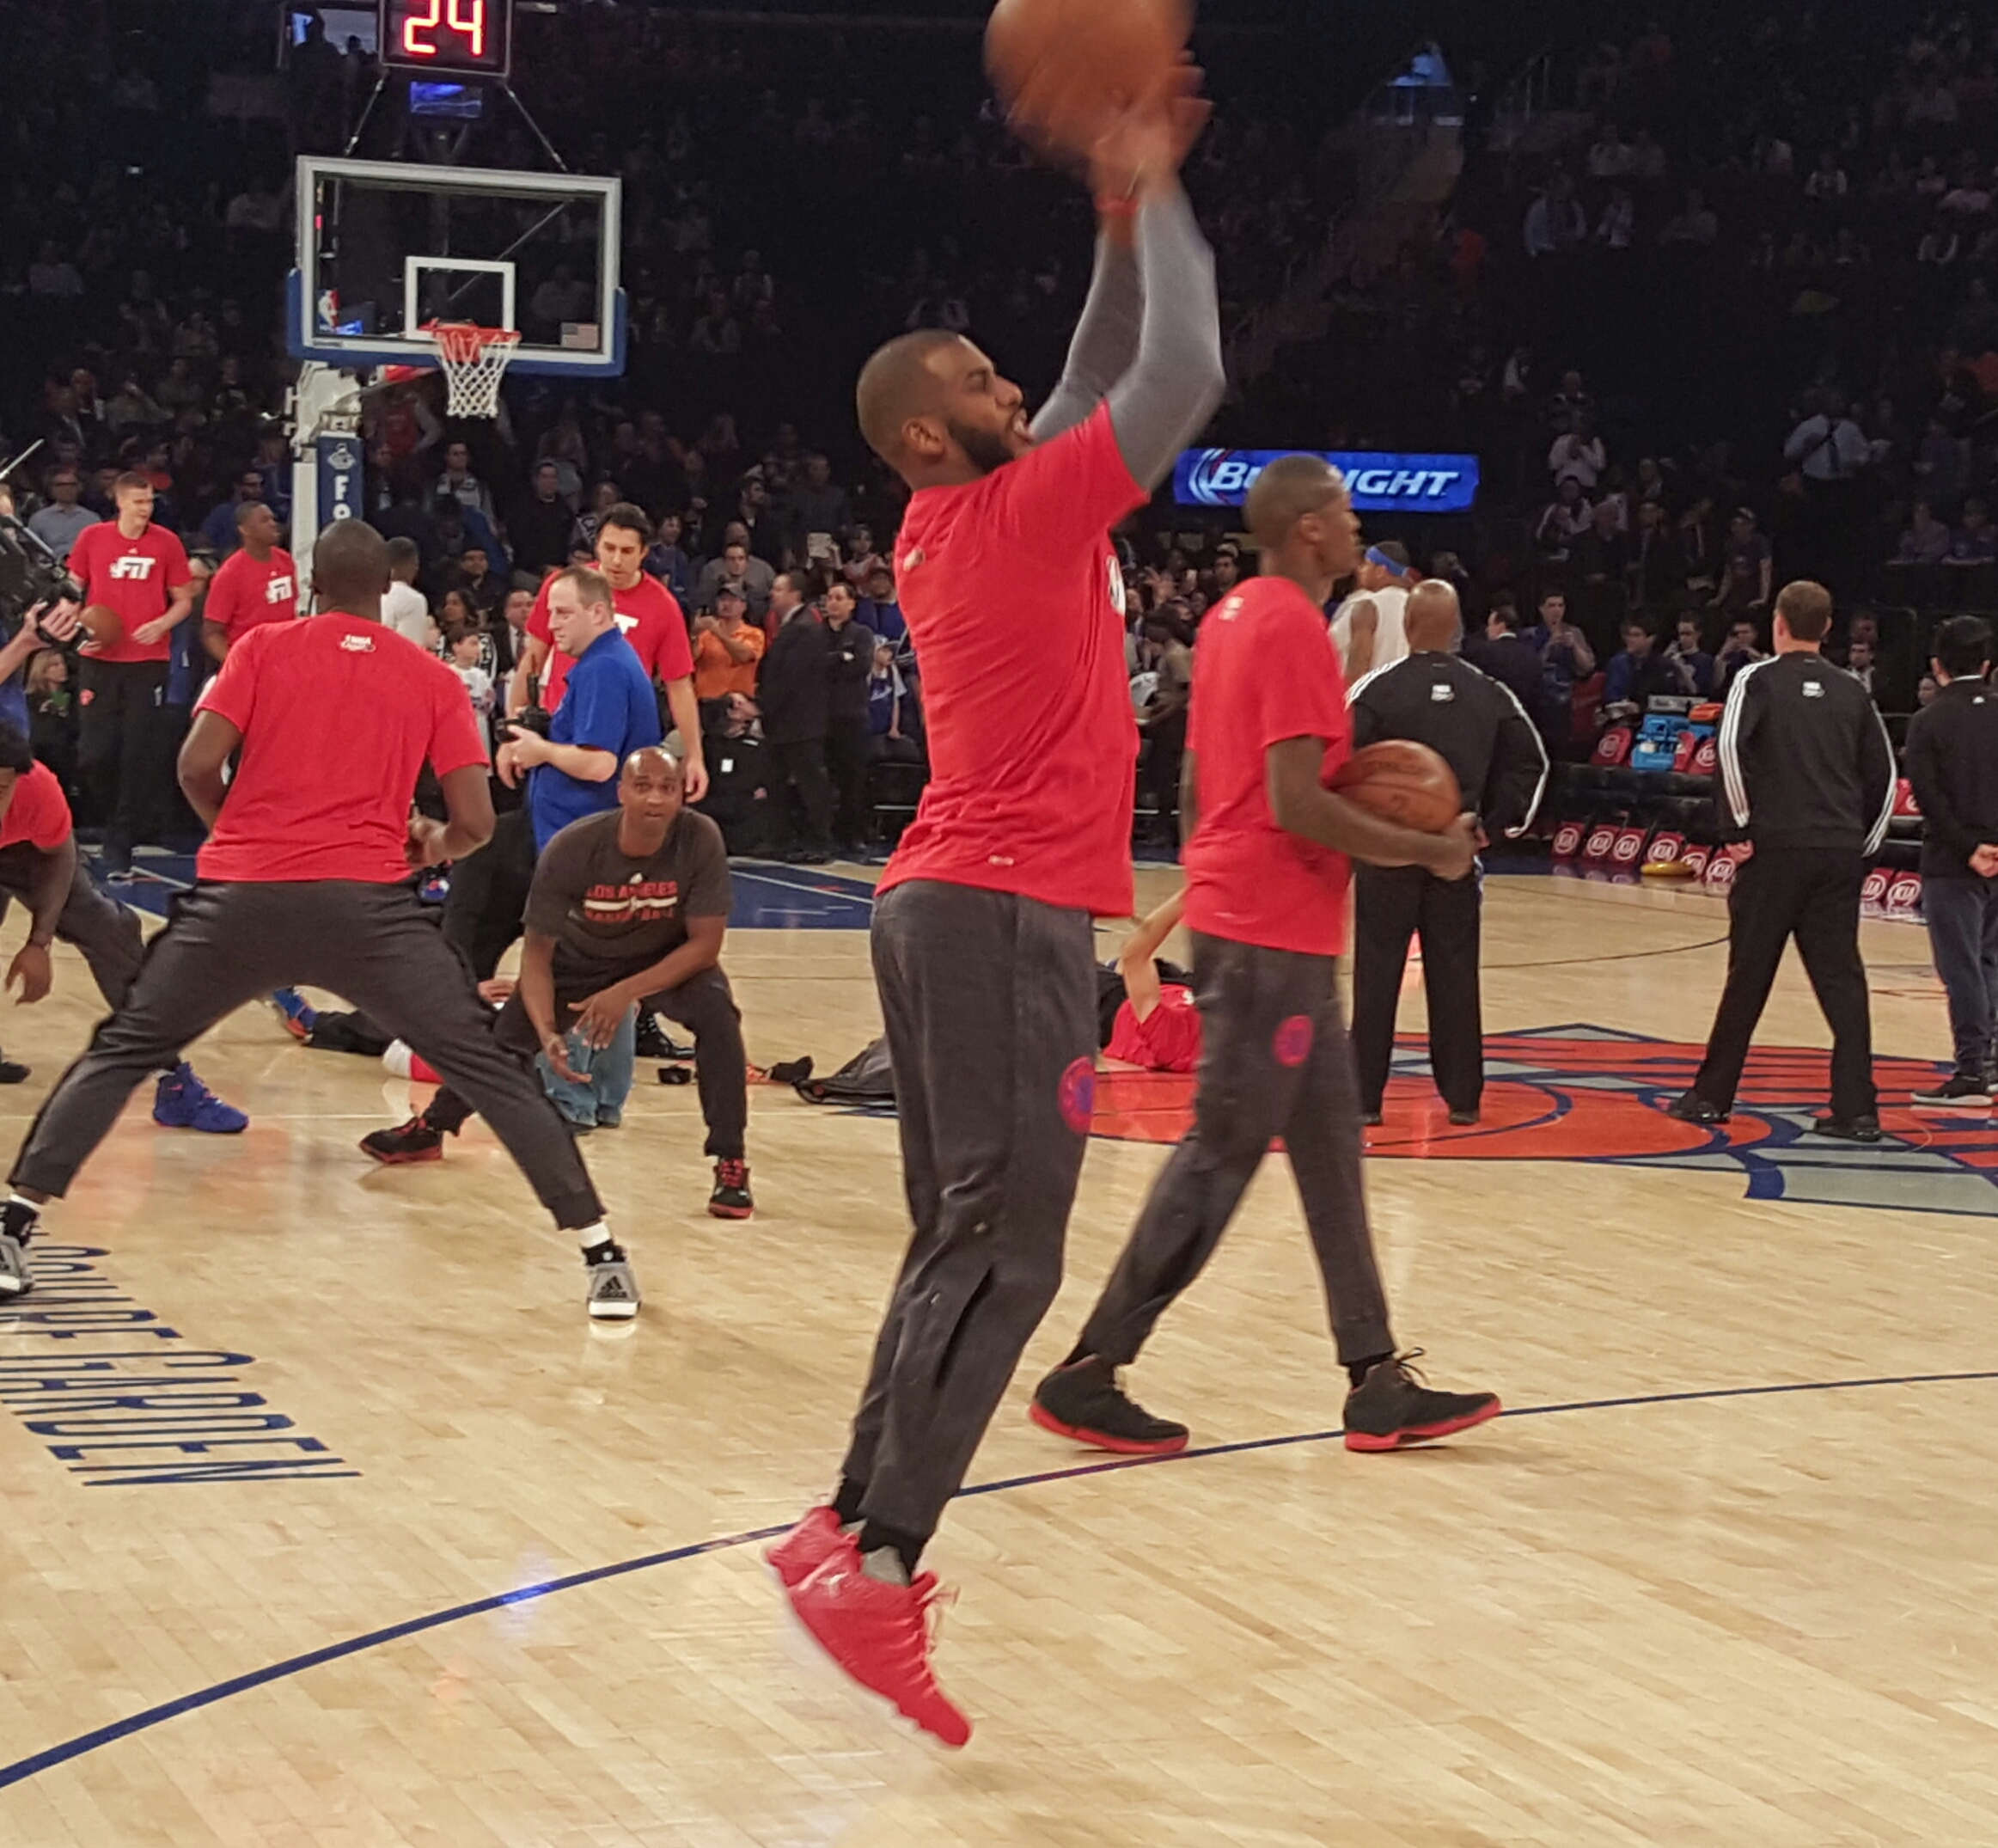 Credit: Barry Holmes/PureSportsNY ... Paul working on his jumper in pre-game warmups.